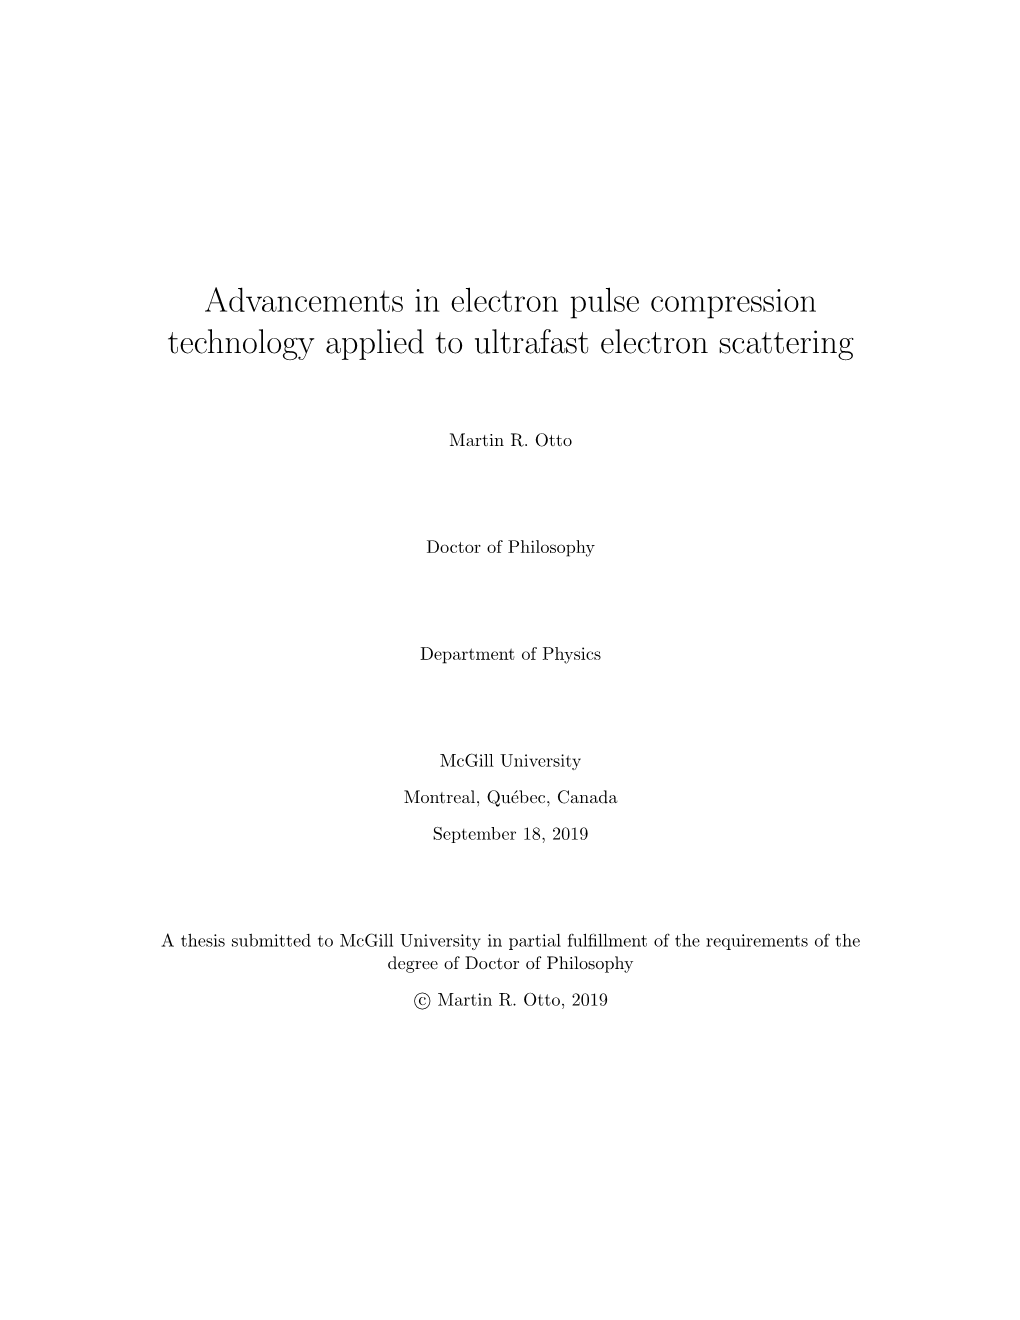 Advancements in Electron Pulse Compression Technology Applied to Ultrafast Electron Scattering